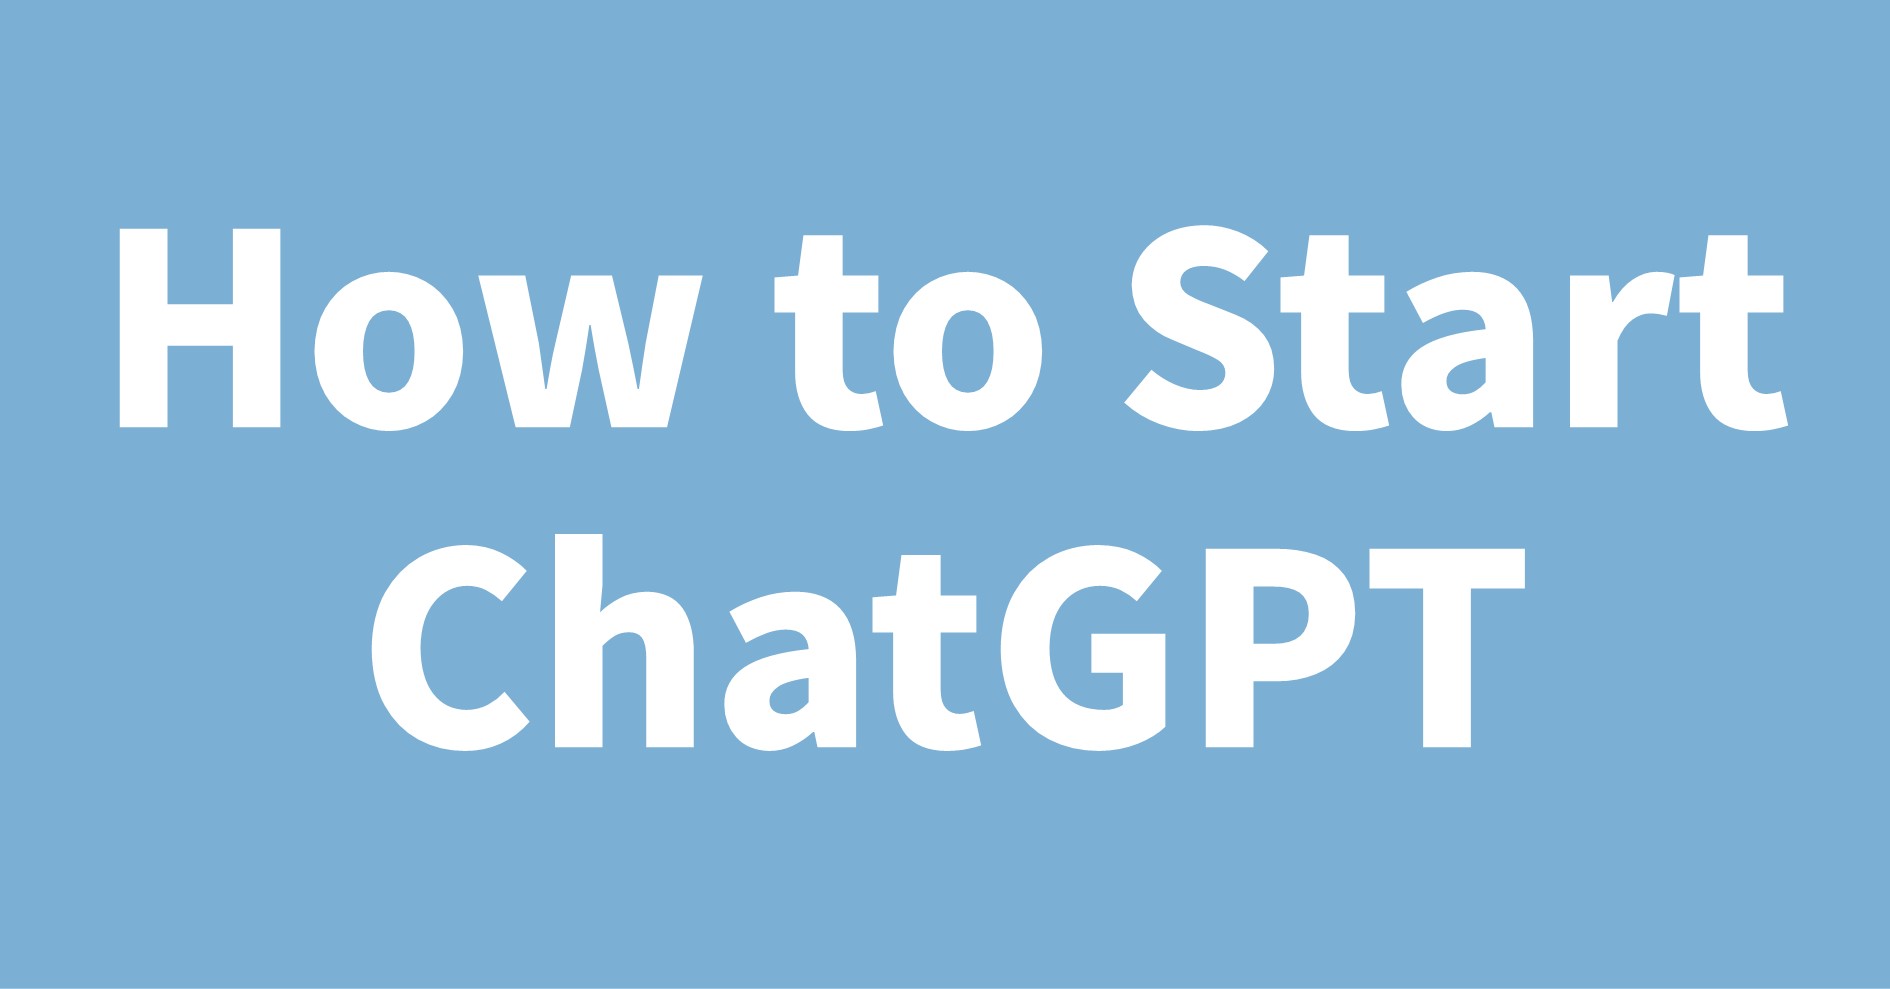 How to Start ChatGPT